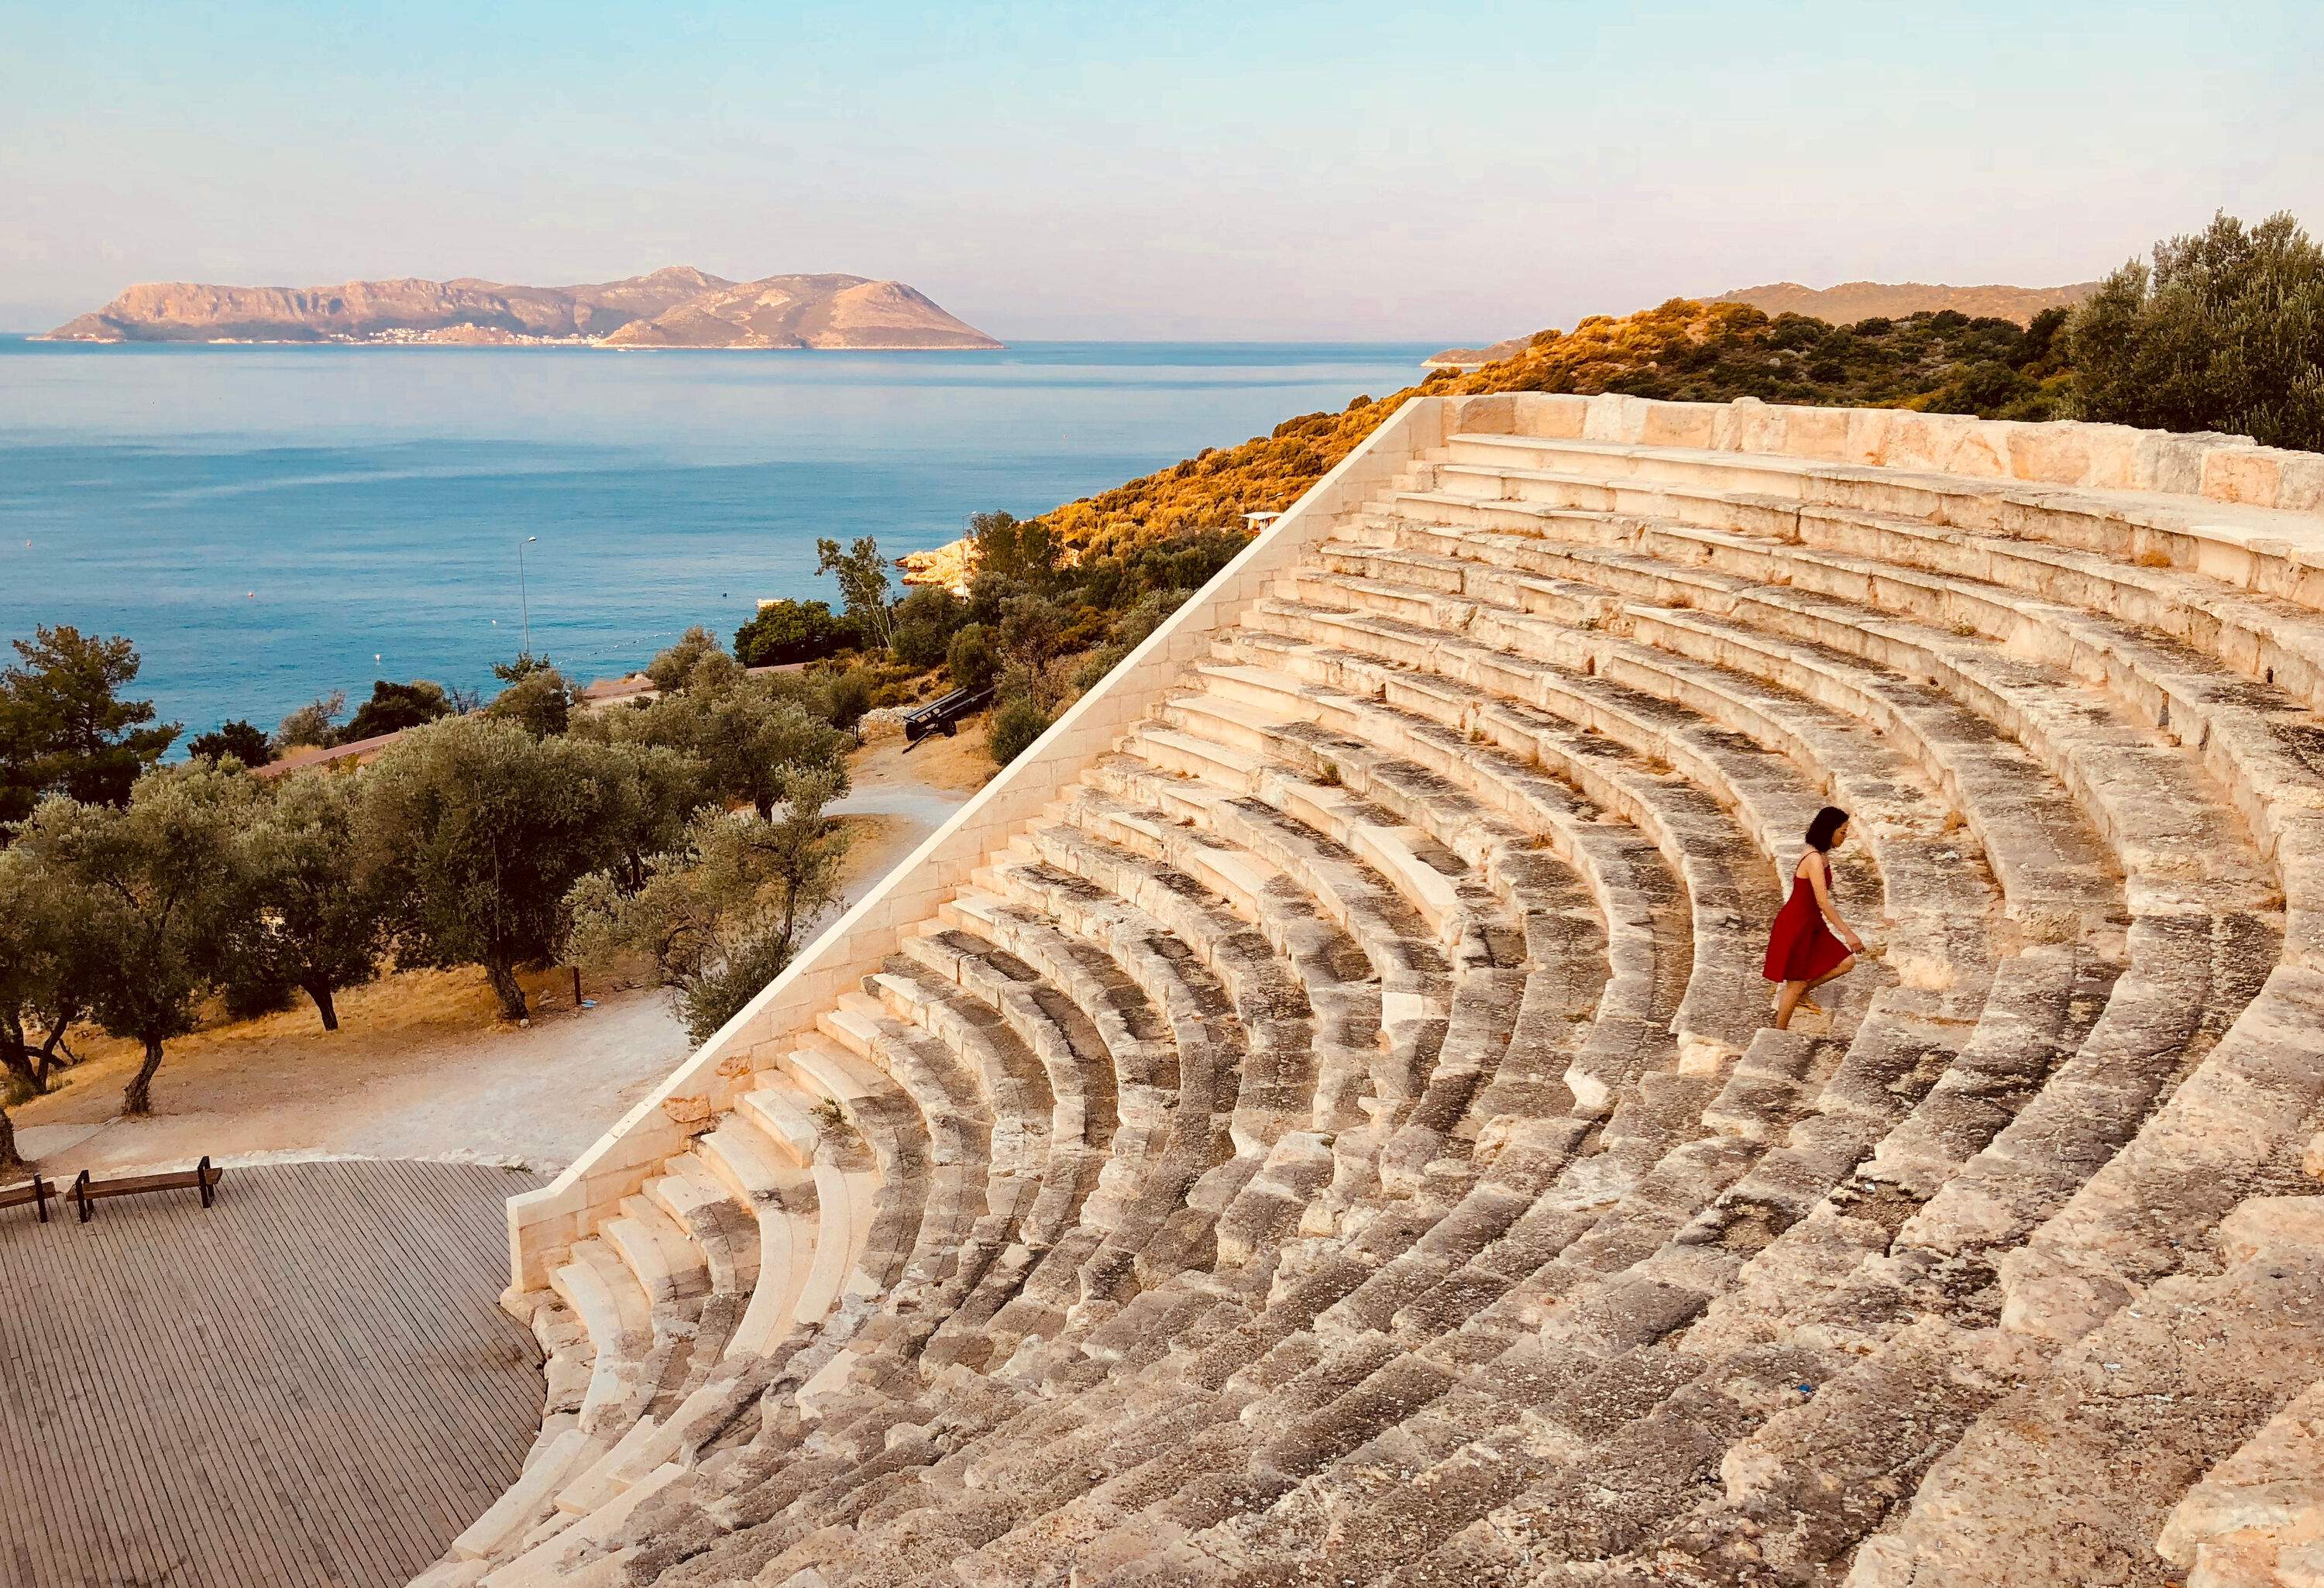 A lady tourist wearing a red dress goes up to the ruined amphitheater on a seaside hill.